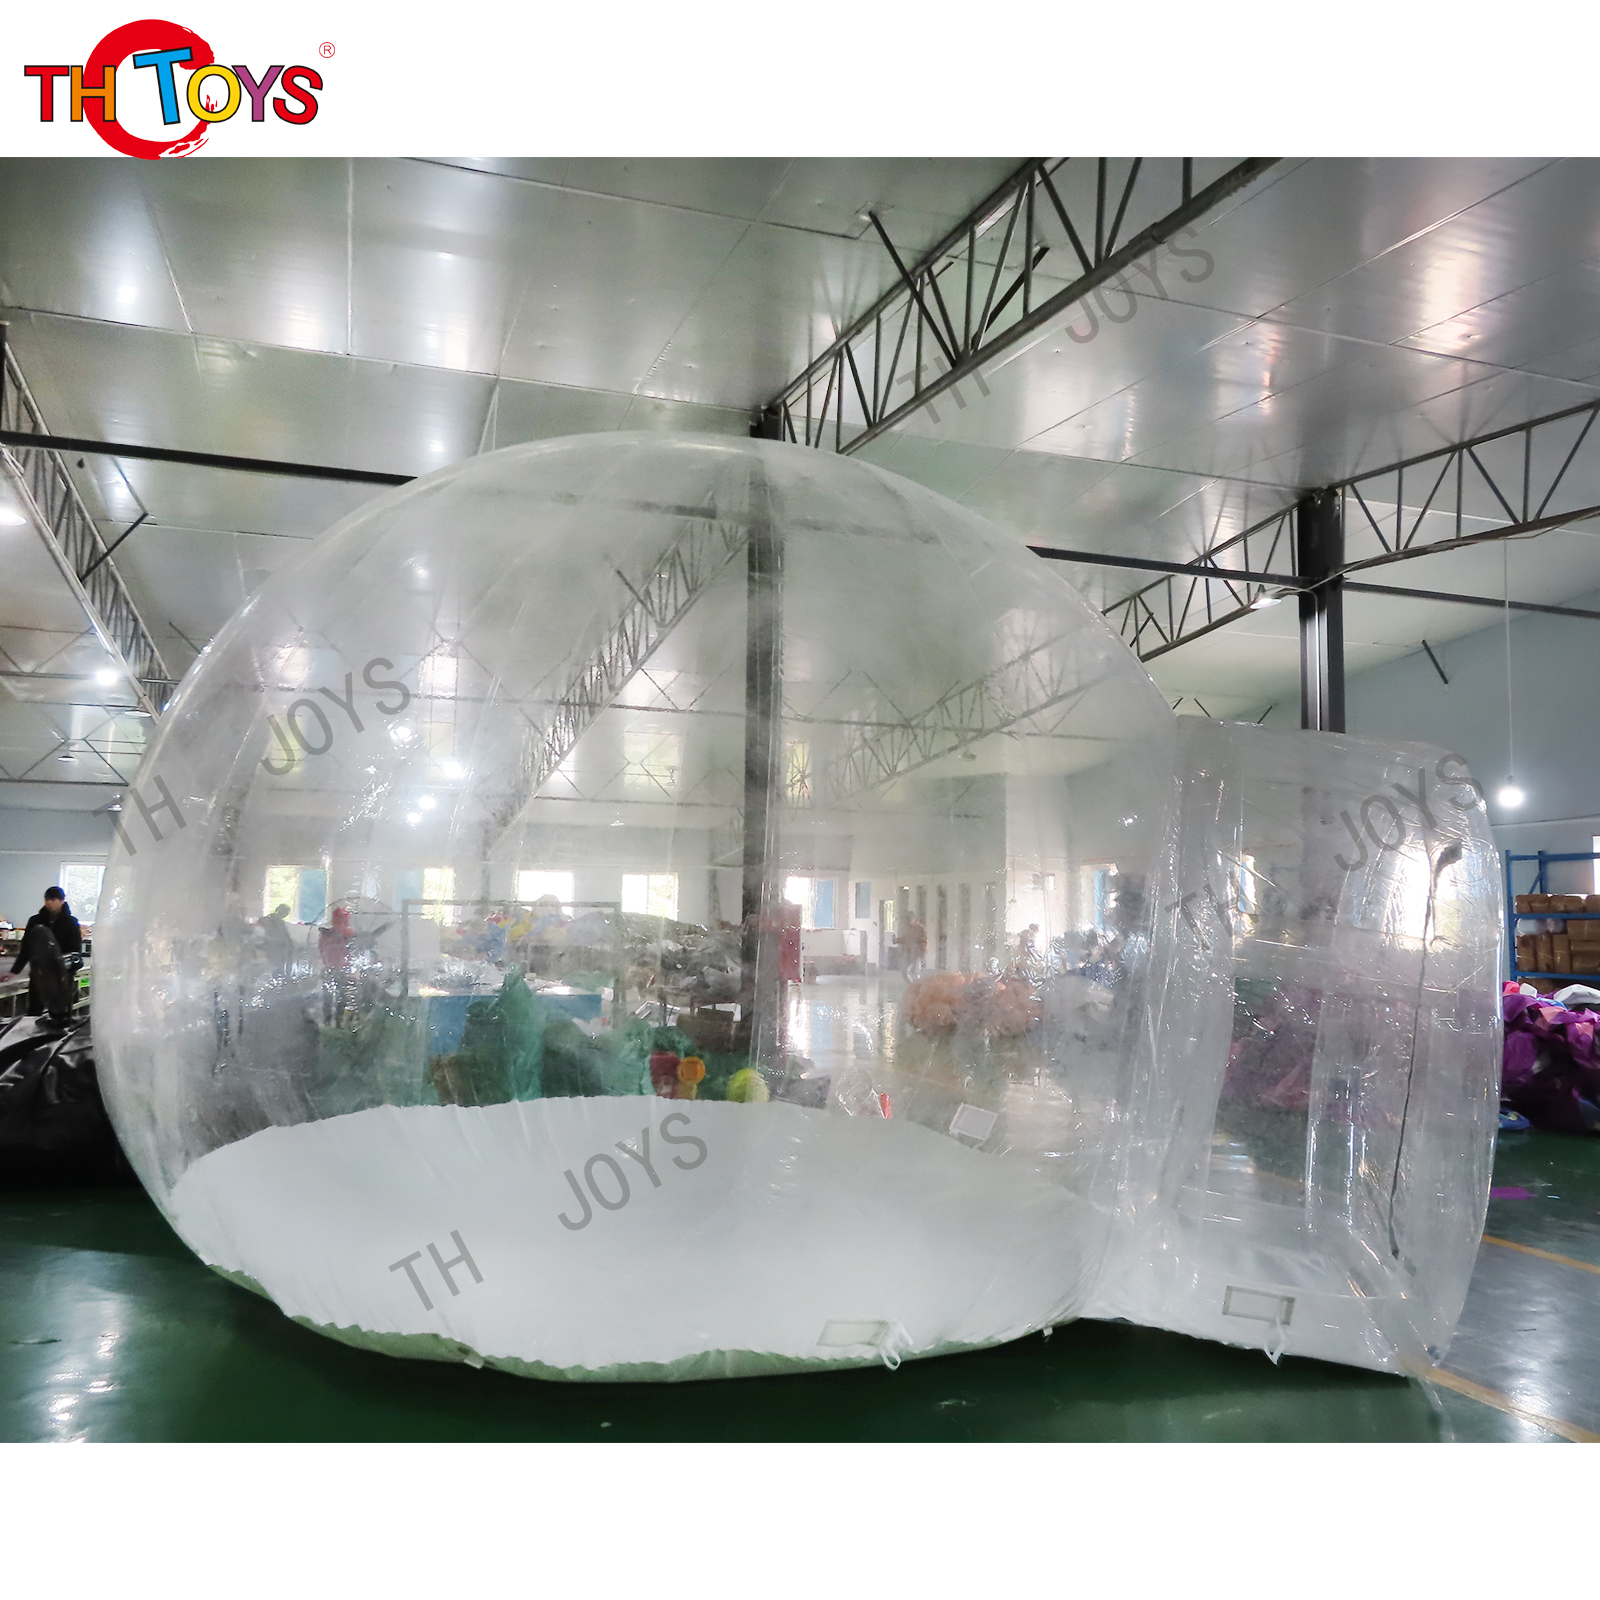 Inflatable Bubble Room-10